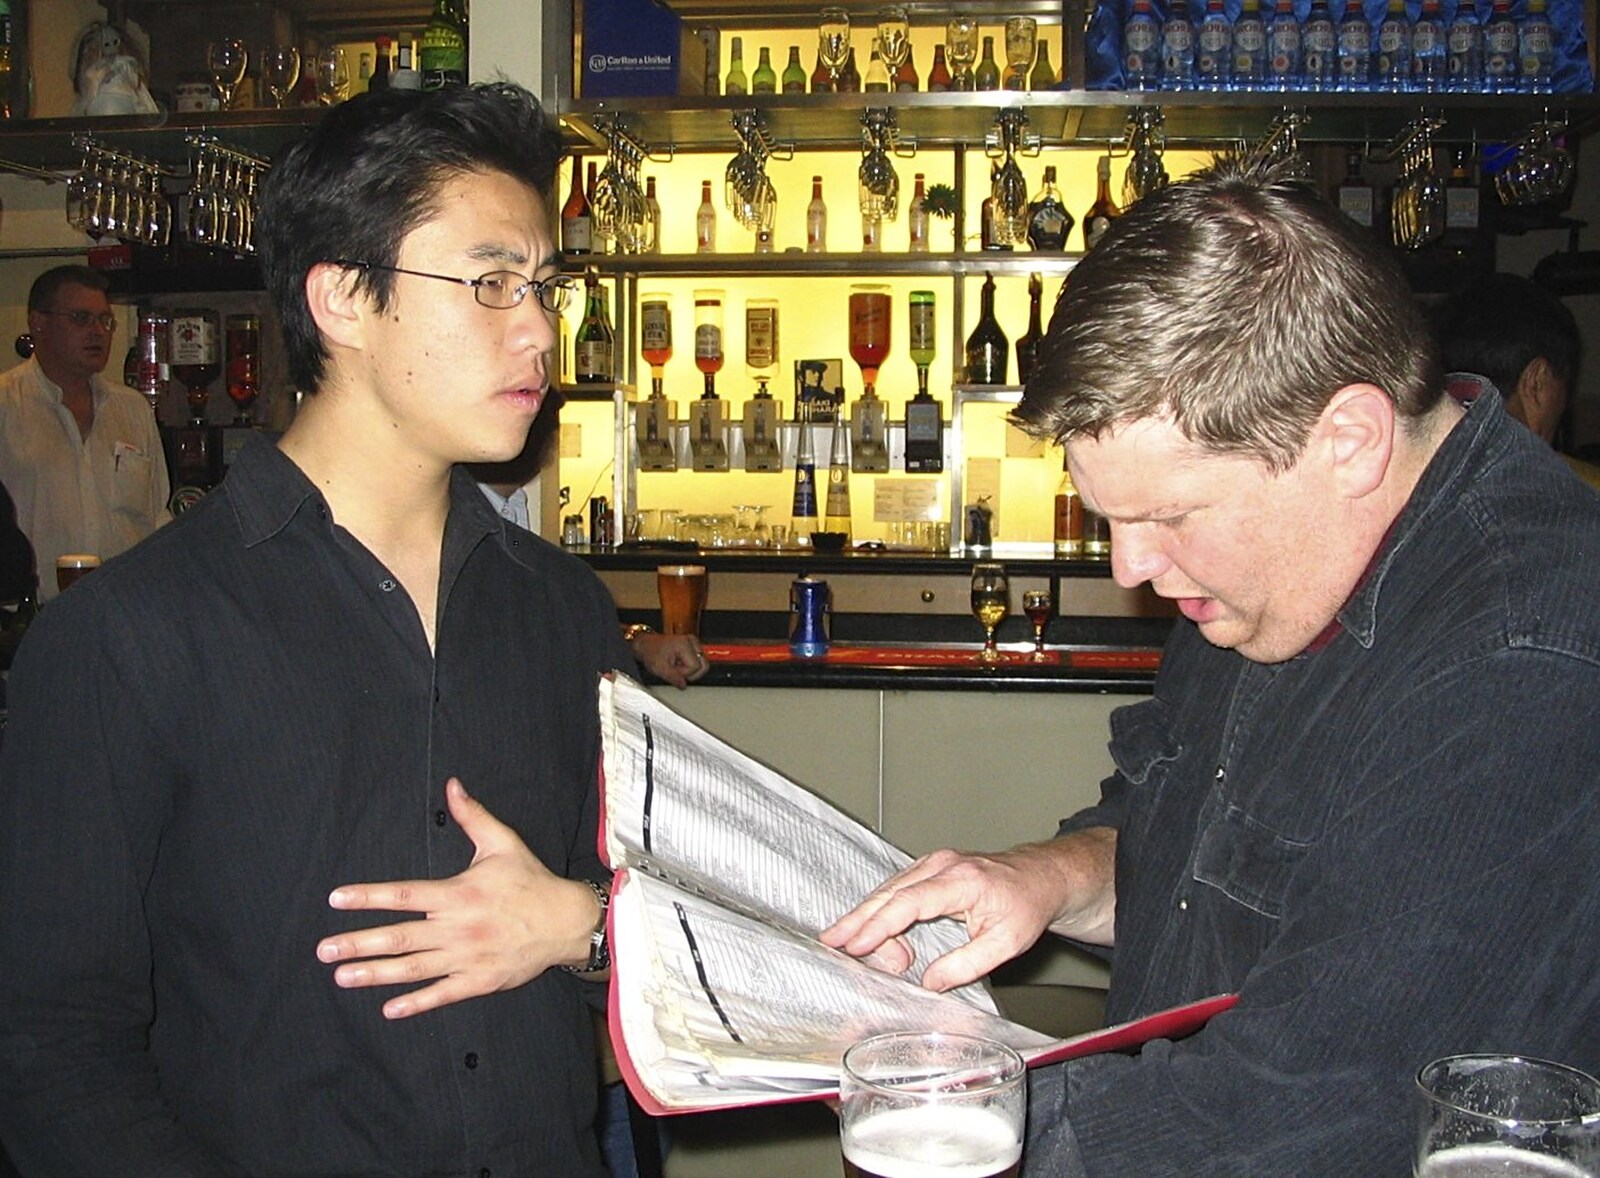 The karaoke list is inspected from Sydney, New South Wales, Australia - 10th October 2004